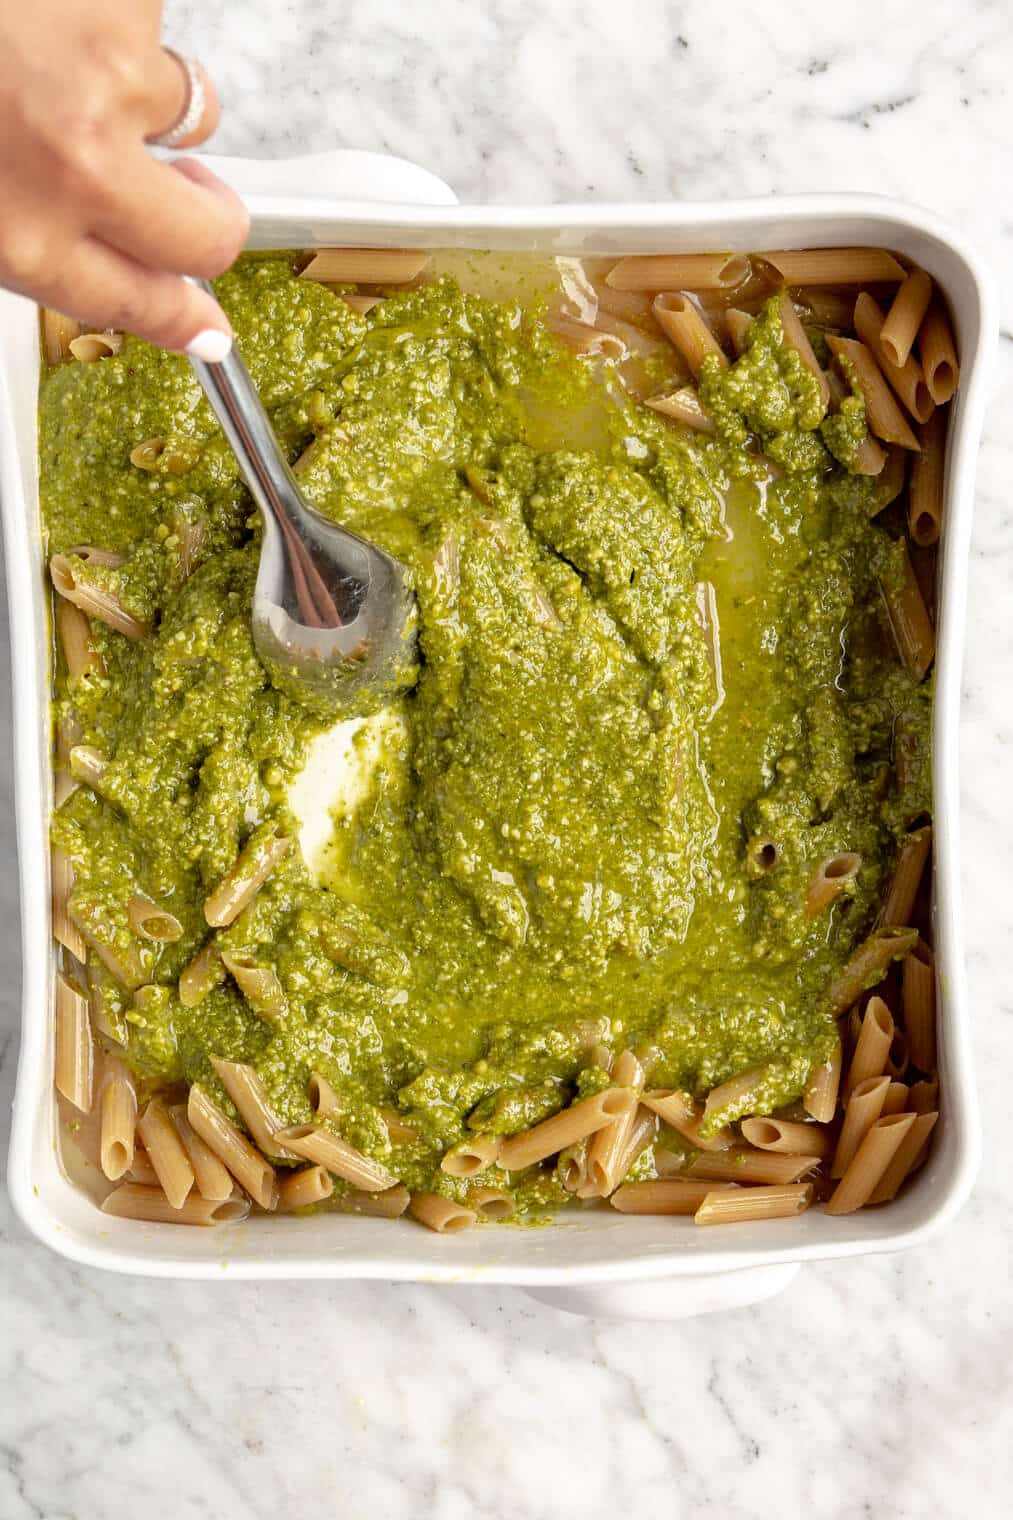 Hand stirring pesto and broth in casserole dish with noodles.